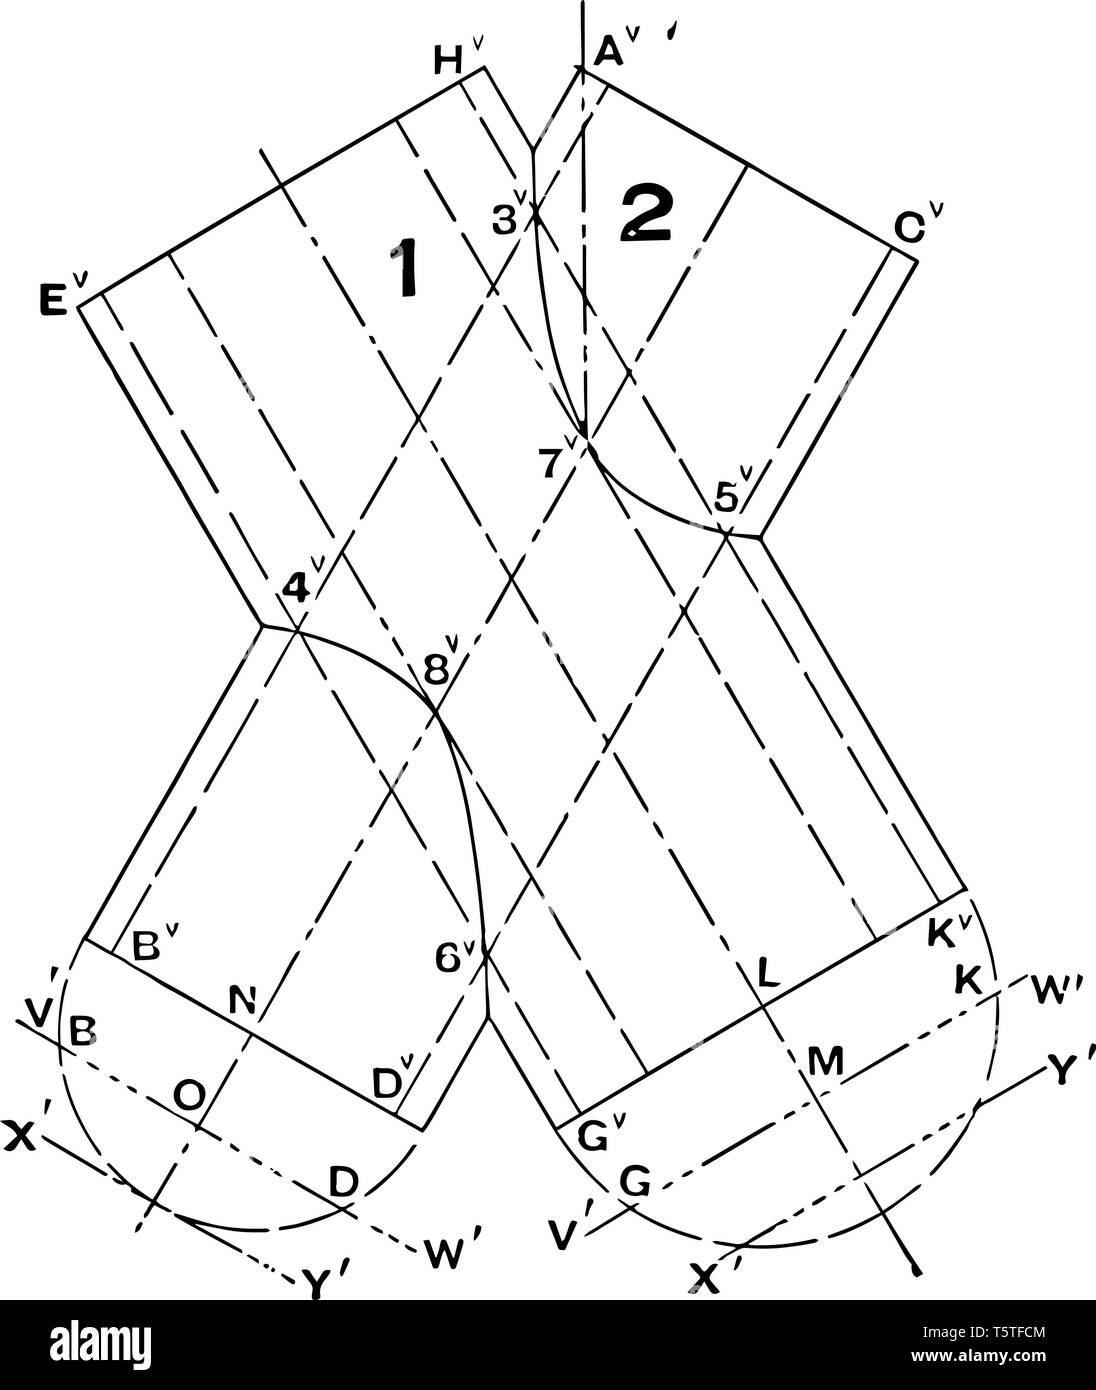 The image shows the auxiliary drawing planes of two intersecting cylinders. There is a geometric process in which, from the reflection of the base, th Stock Vector